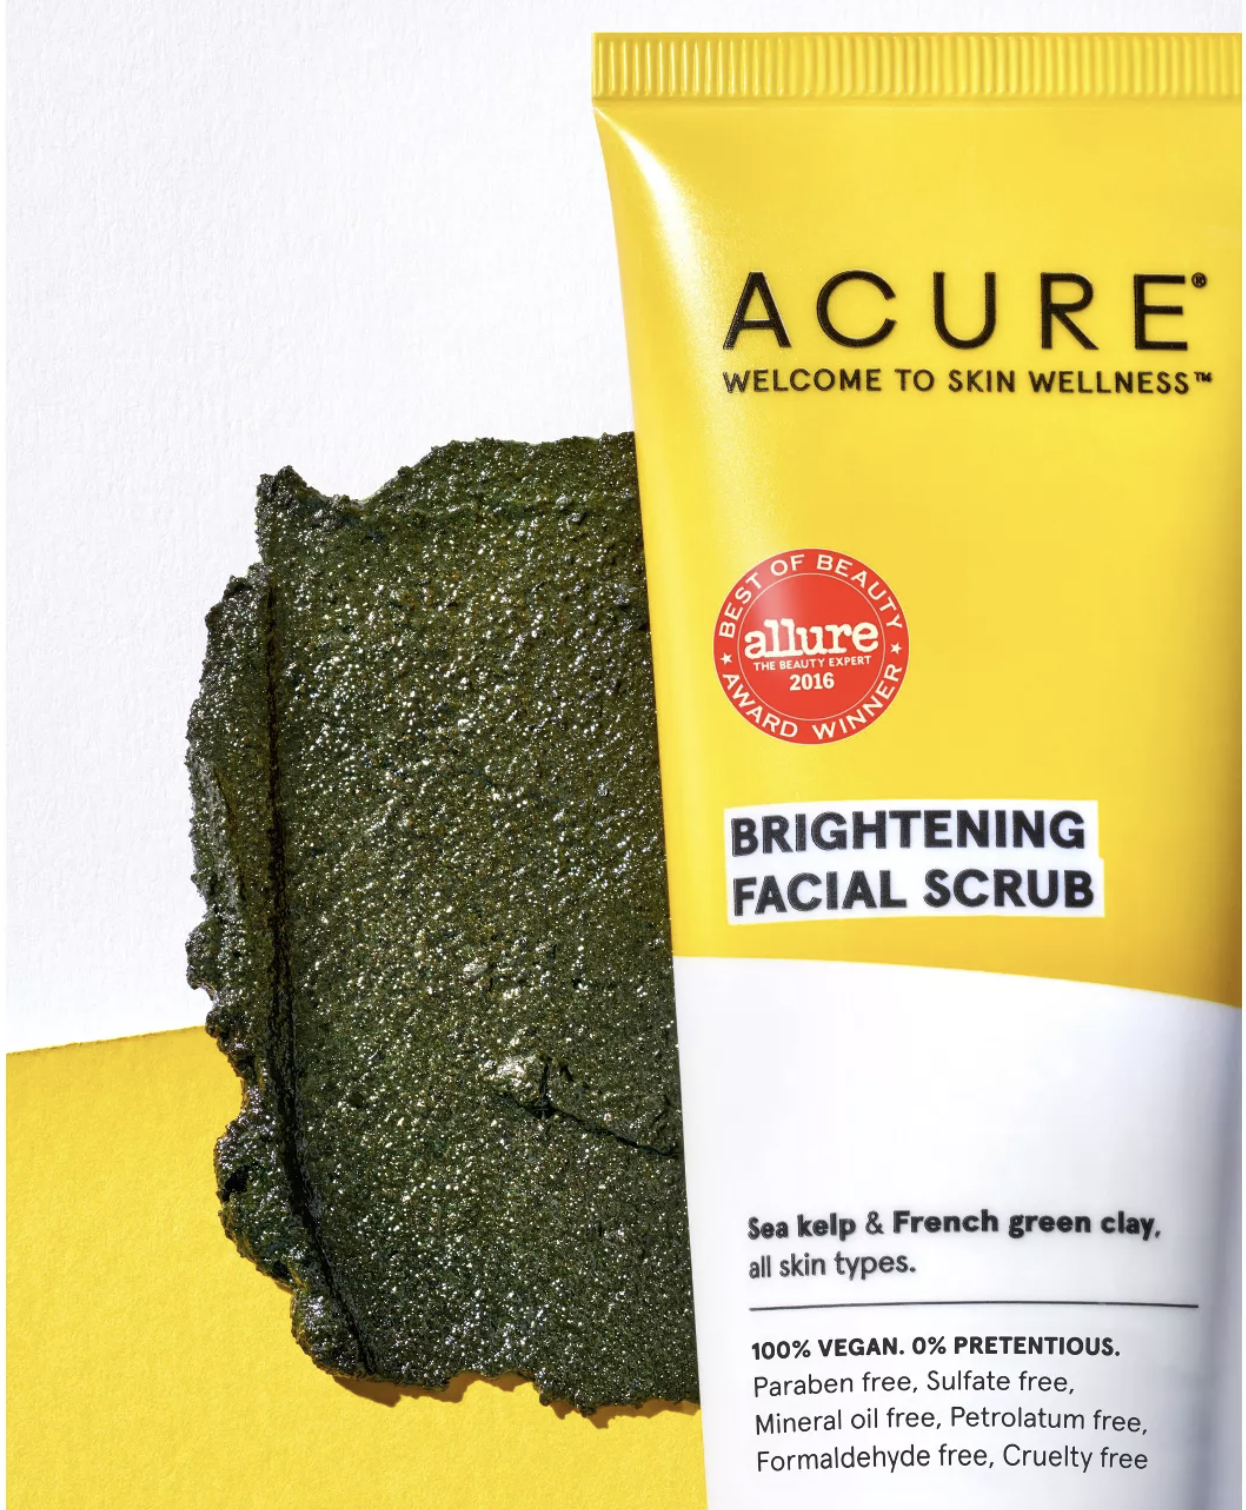 A bottle of Acure facial scrub